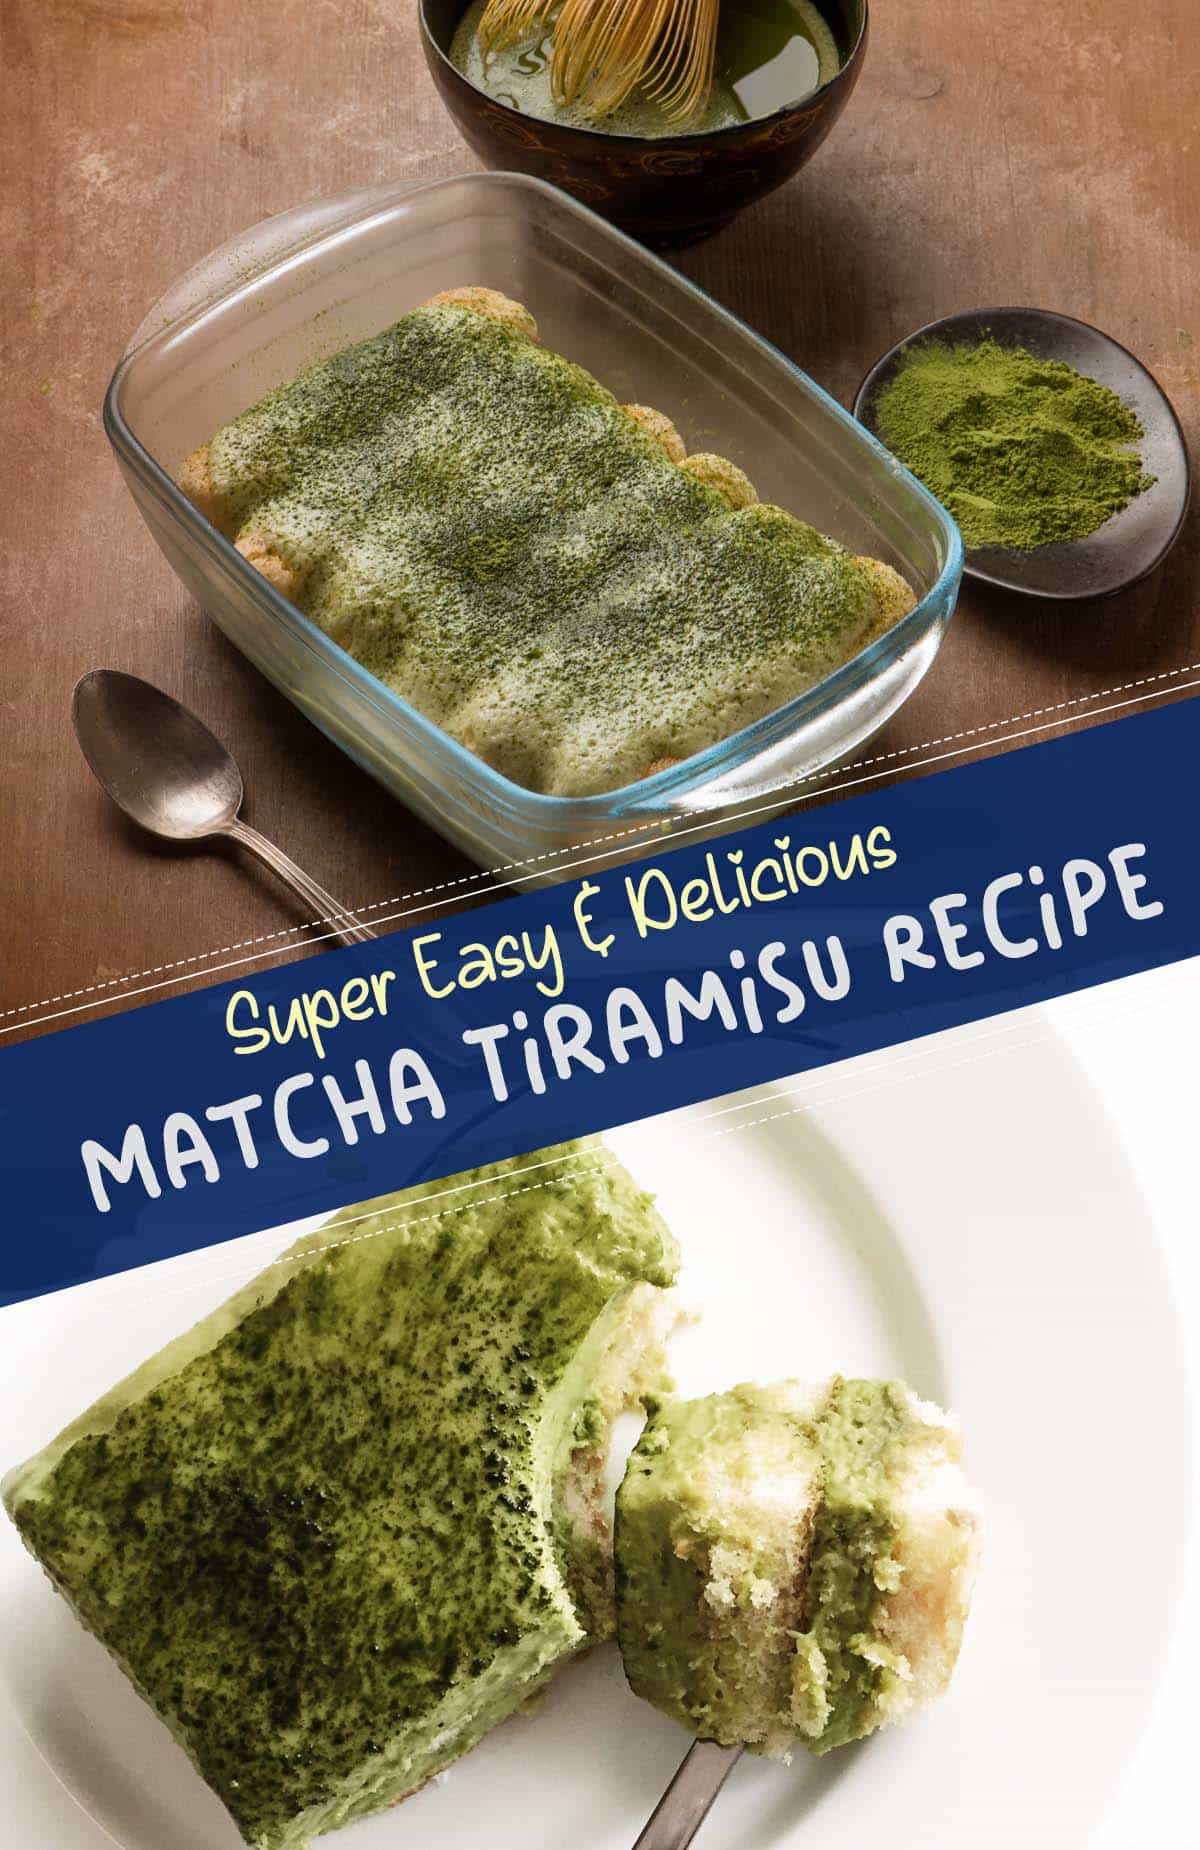 Matcha Tiramisu: Layers of homemade ladyfingers drenched in vibrant green matcha tea, intertwined with luscious mascarpone cream, all topped with a dusting of matcha powder.